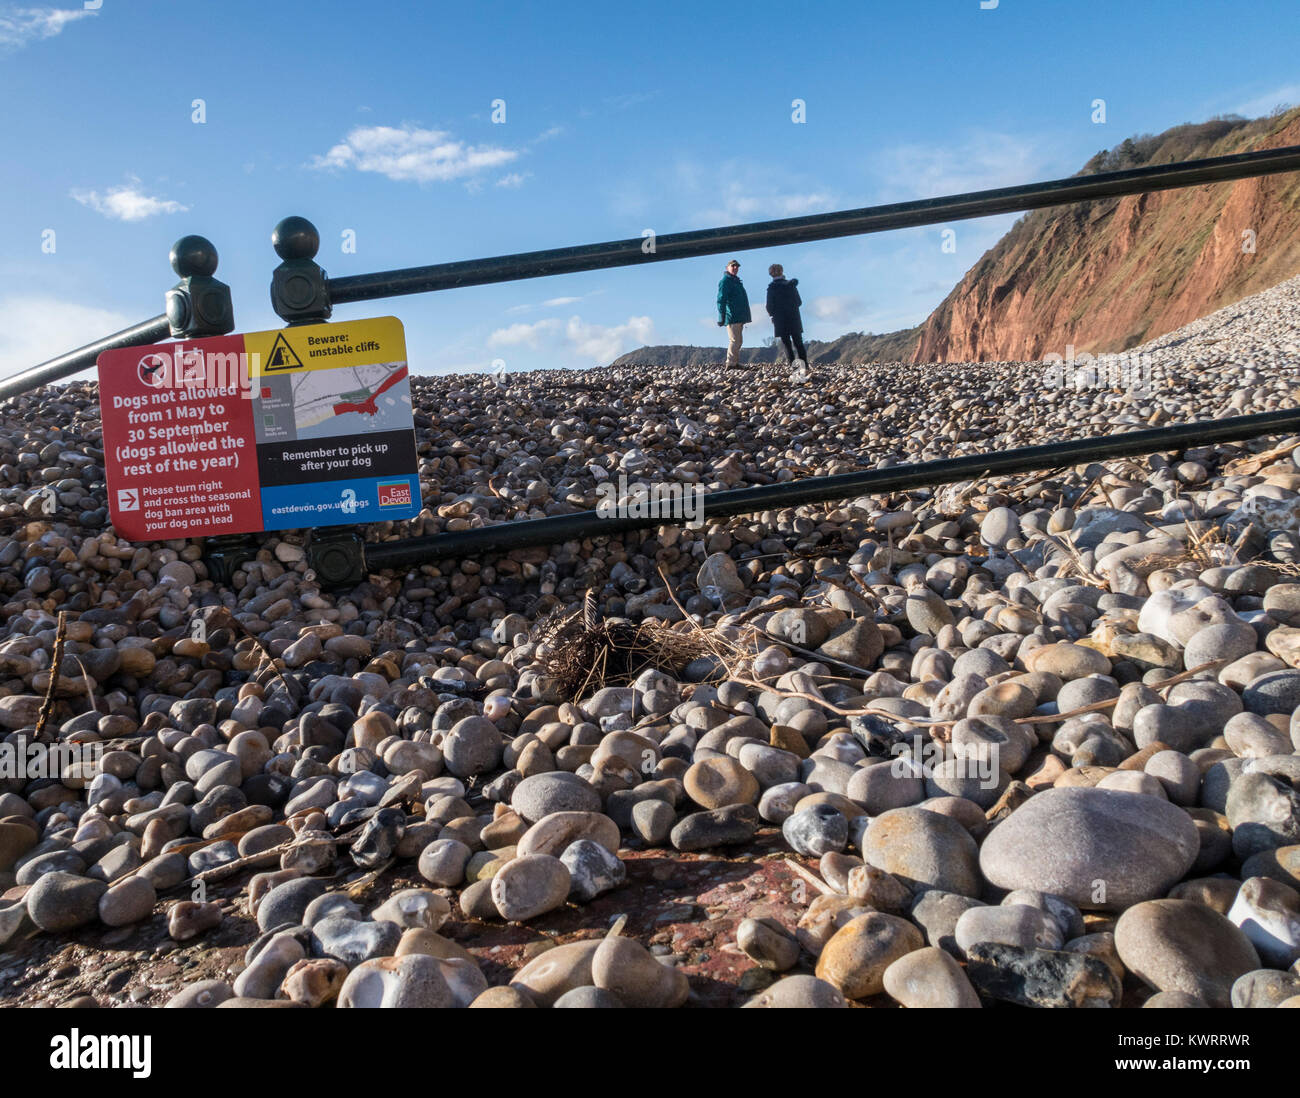 Sidmouth, Devon. 5th Jan, 2018. UK Weather:  Railings around the west beach at Sidmouth are almost buried under shale after Storm Eleanor departed. Credit: Photo Central/Alamy Live News Stock Photo